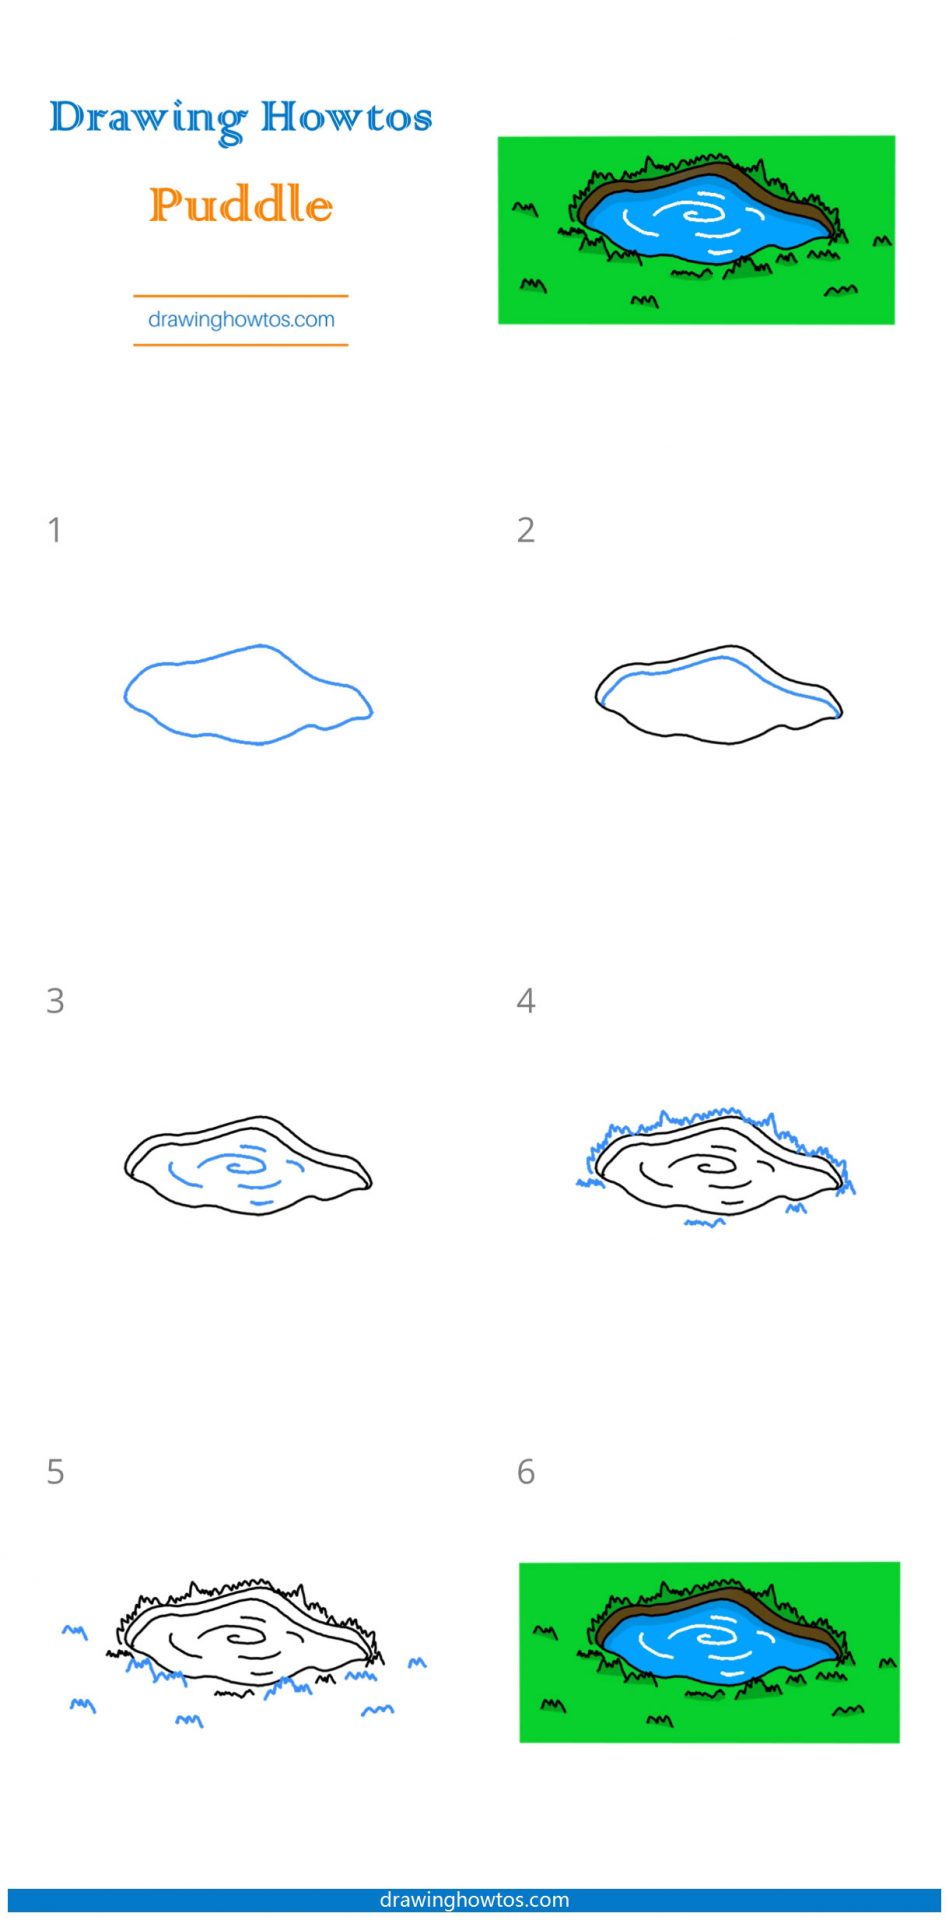 How to Draw a Puddle Step by Step